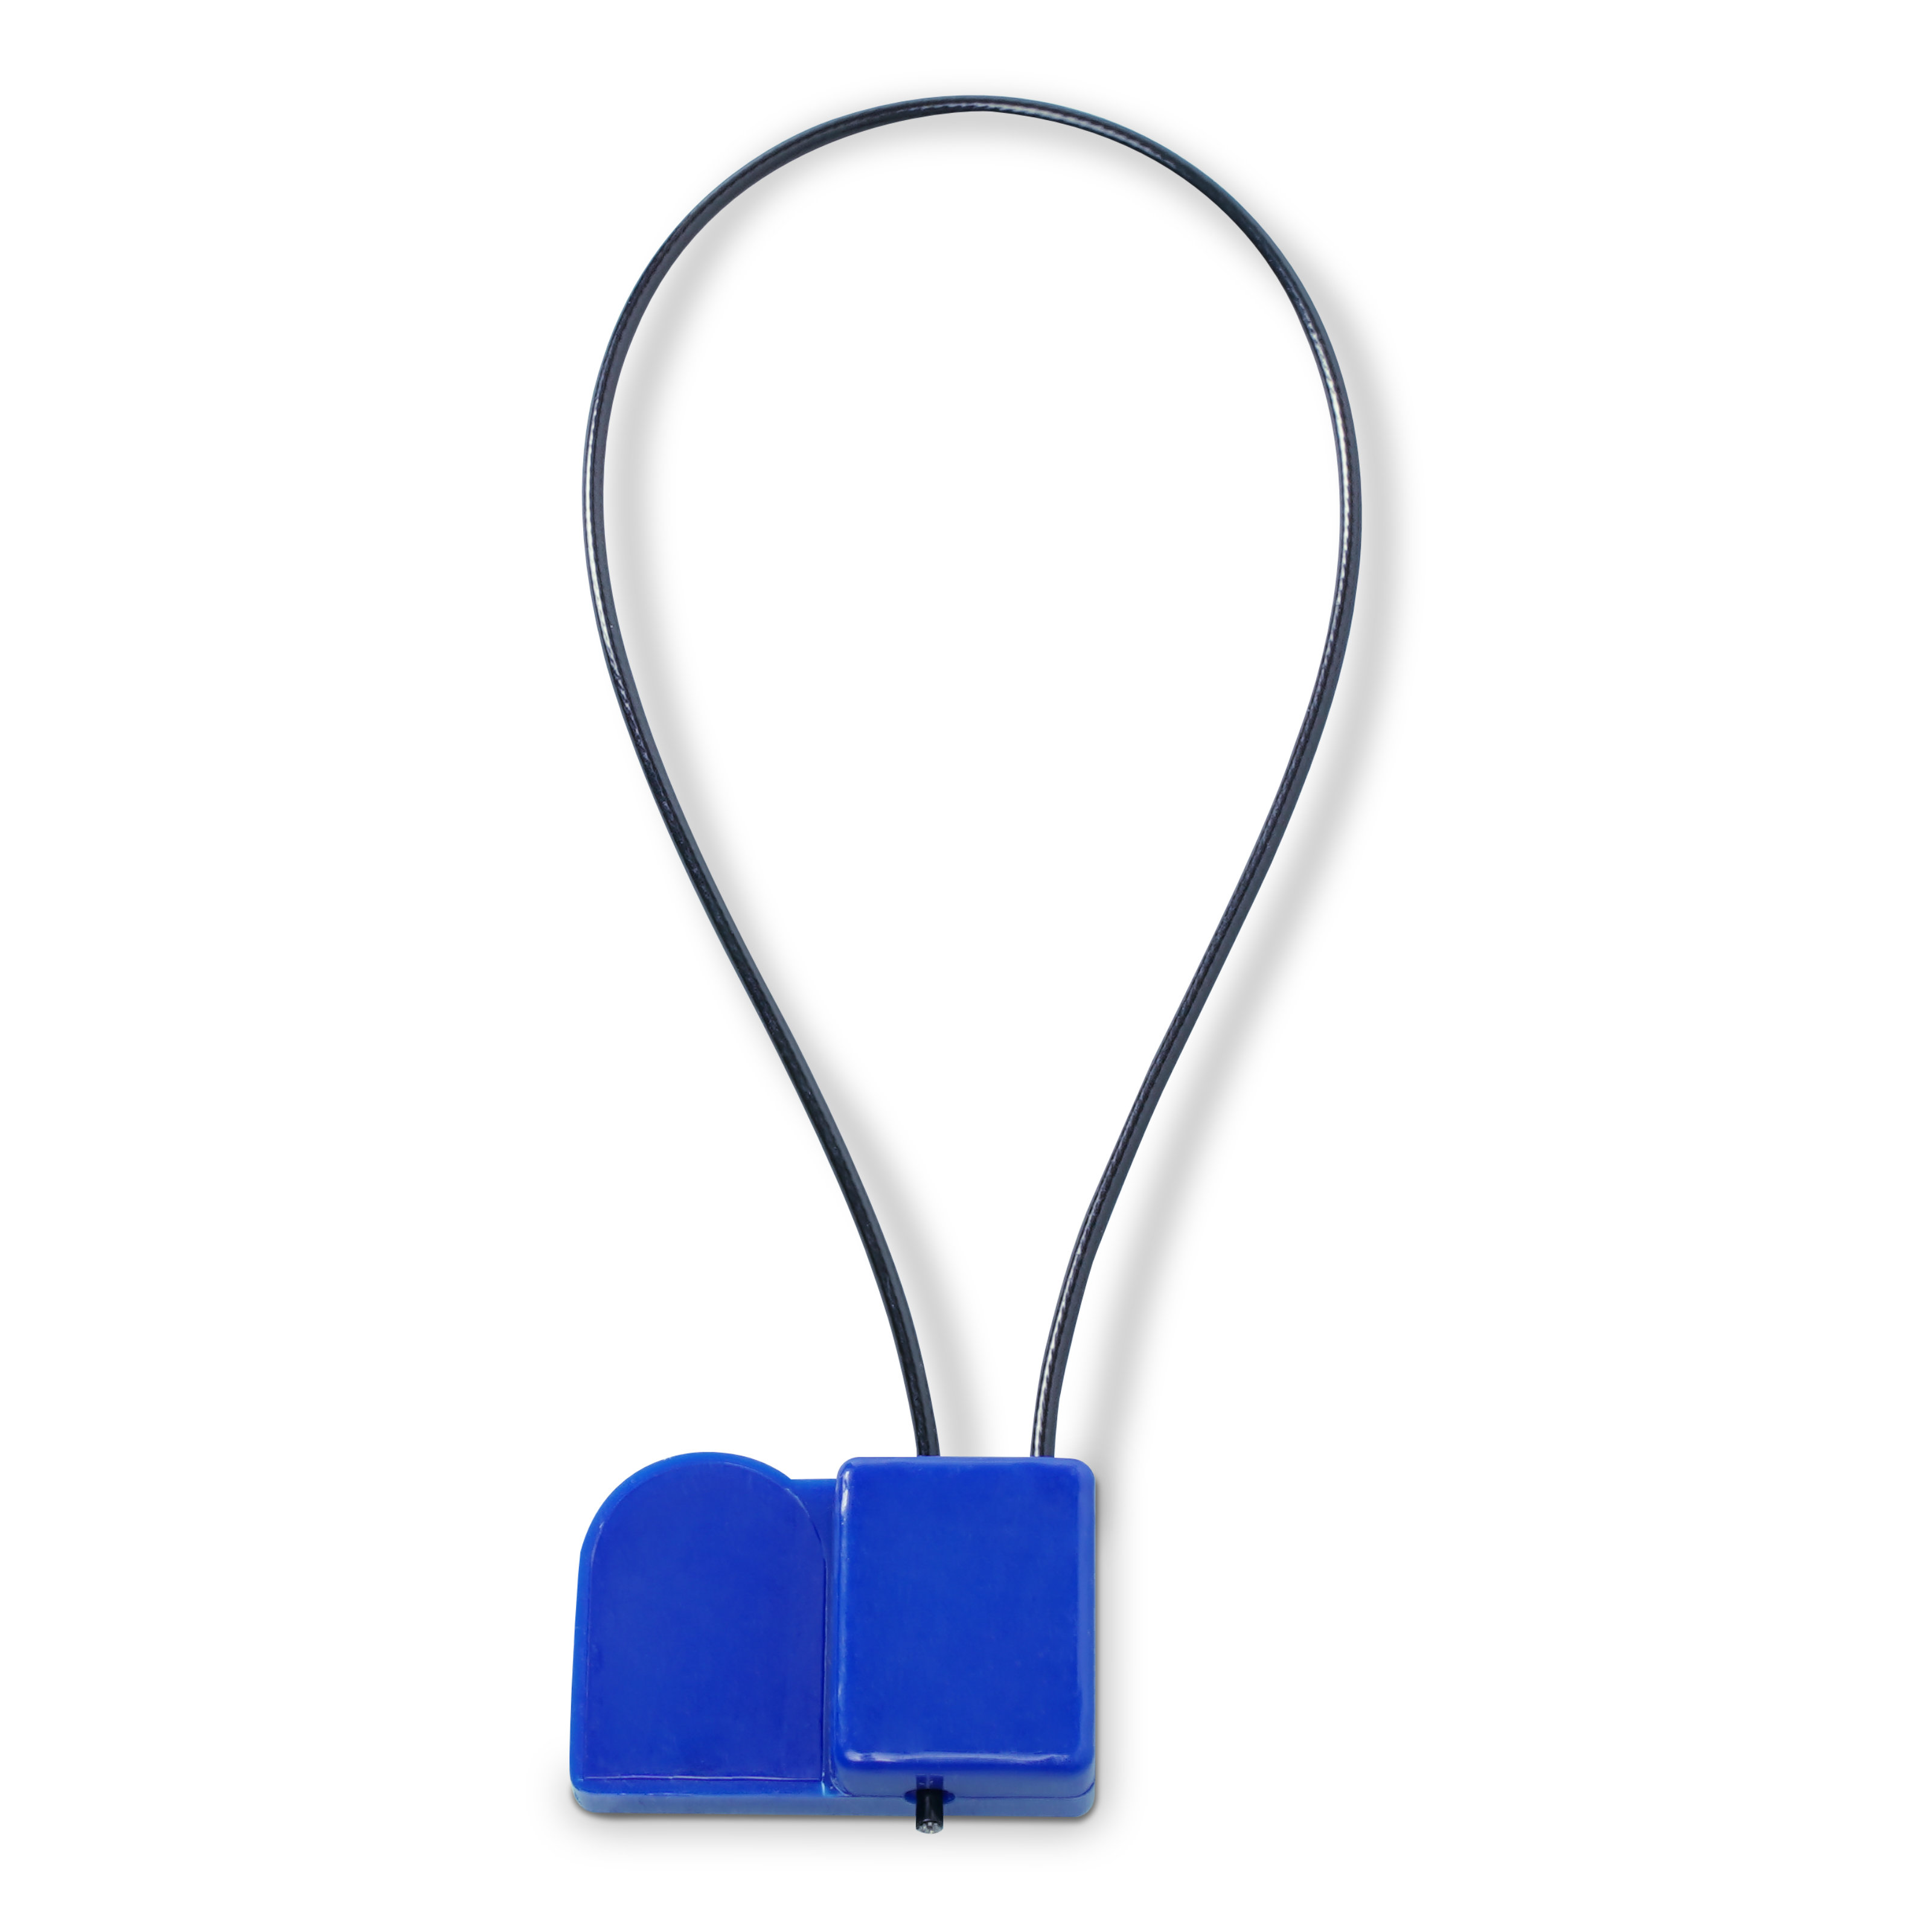 NFC seal/cable tie ABS - steel strap - loop length 280 x 1.5 mm - NTAG213 - 180 byte - blue